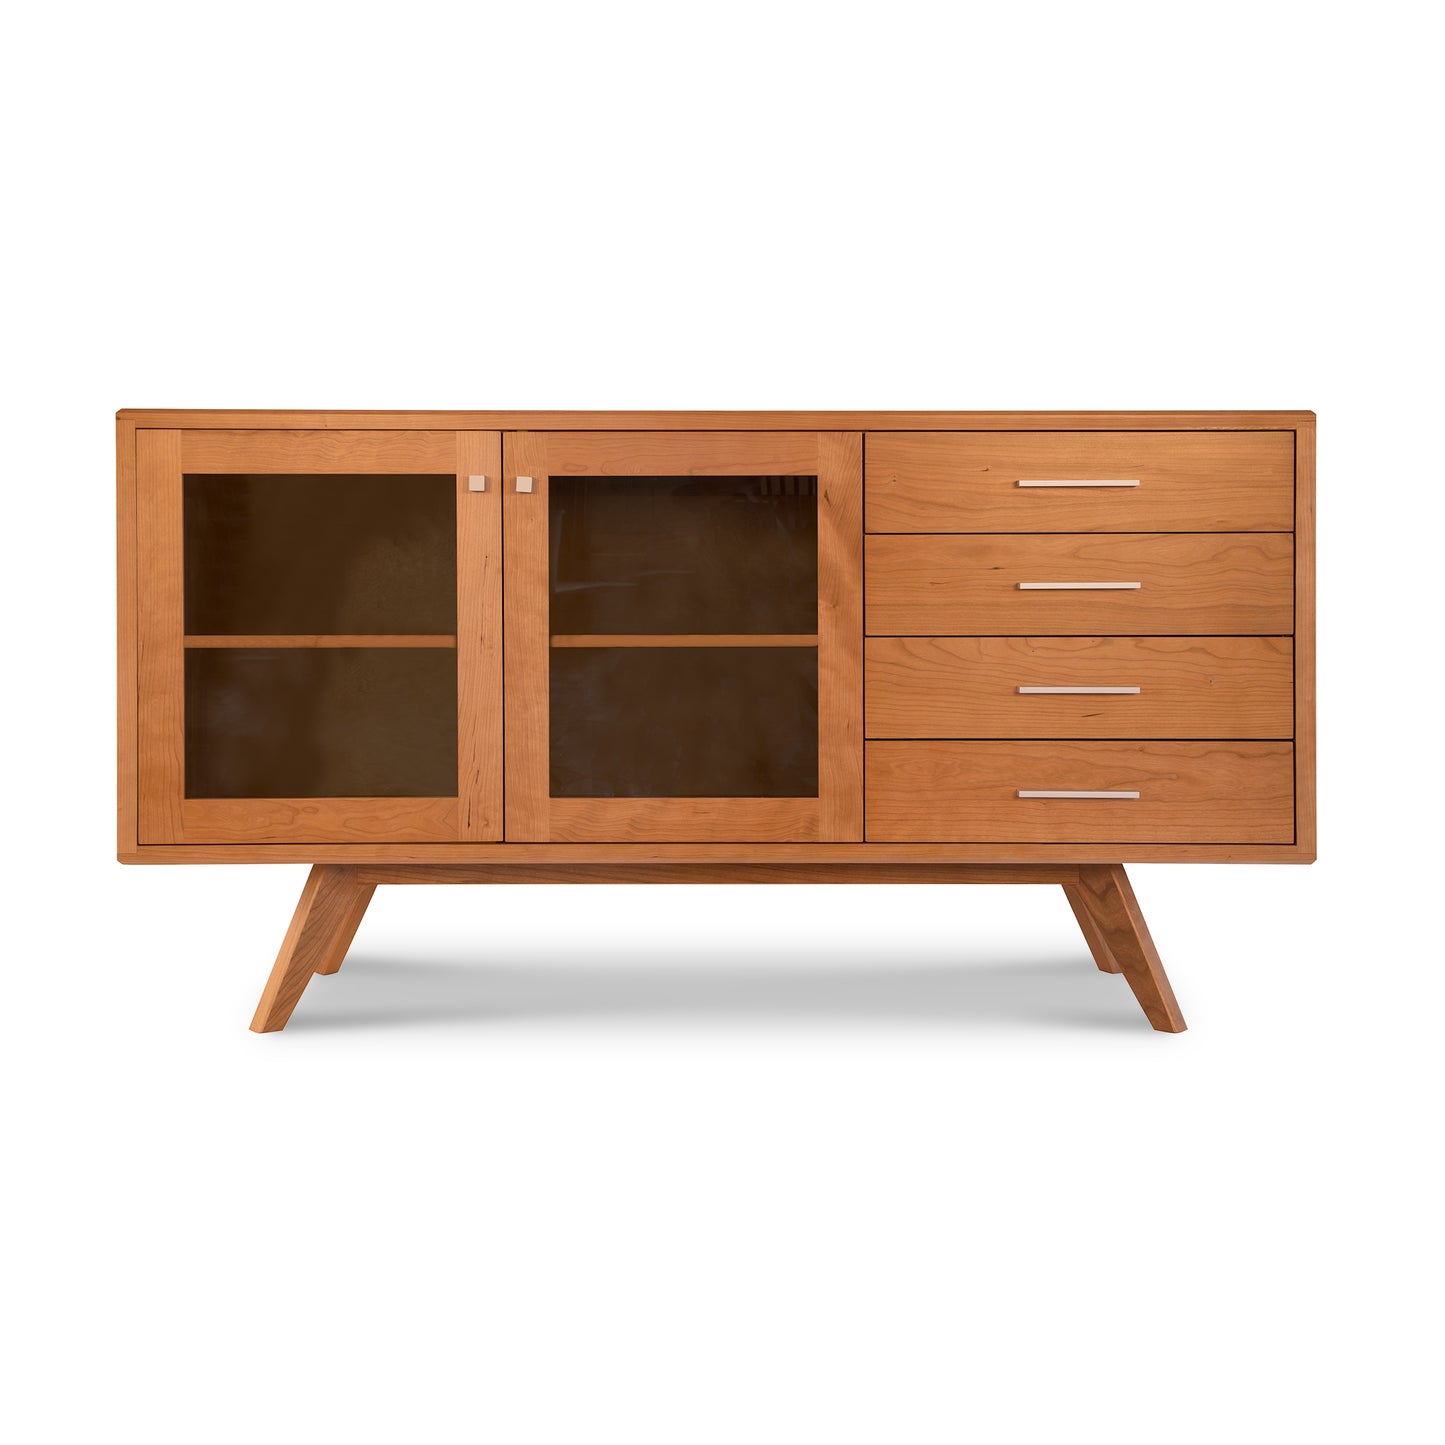 A mid-century modern Lyndon Furniture Brighton Buffet with glass doors and drawers, offering ample storage space.